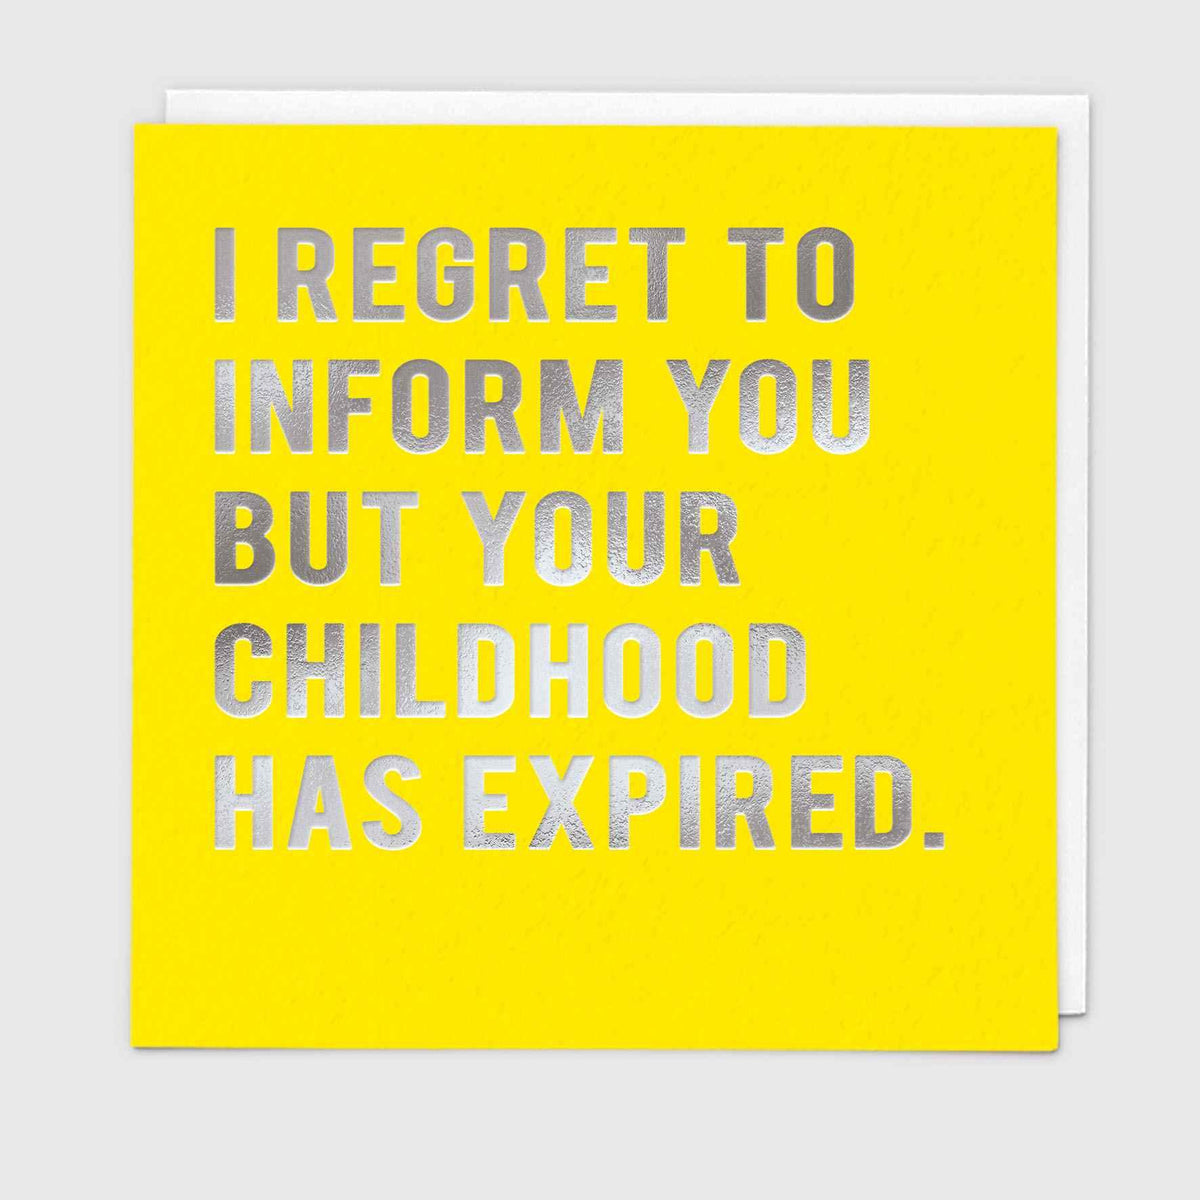 Your Childhood Has Expired Funny Card - Penny Black